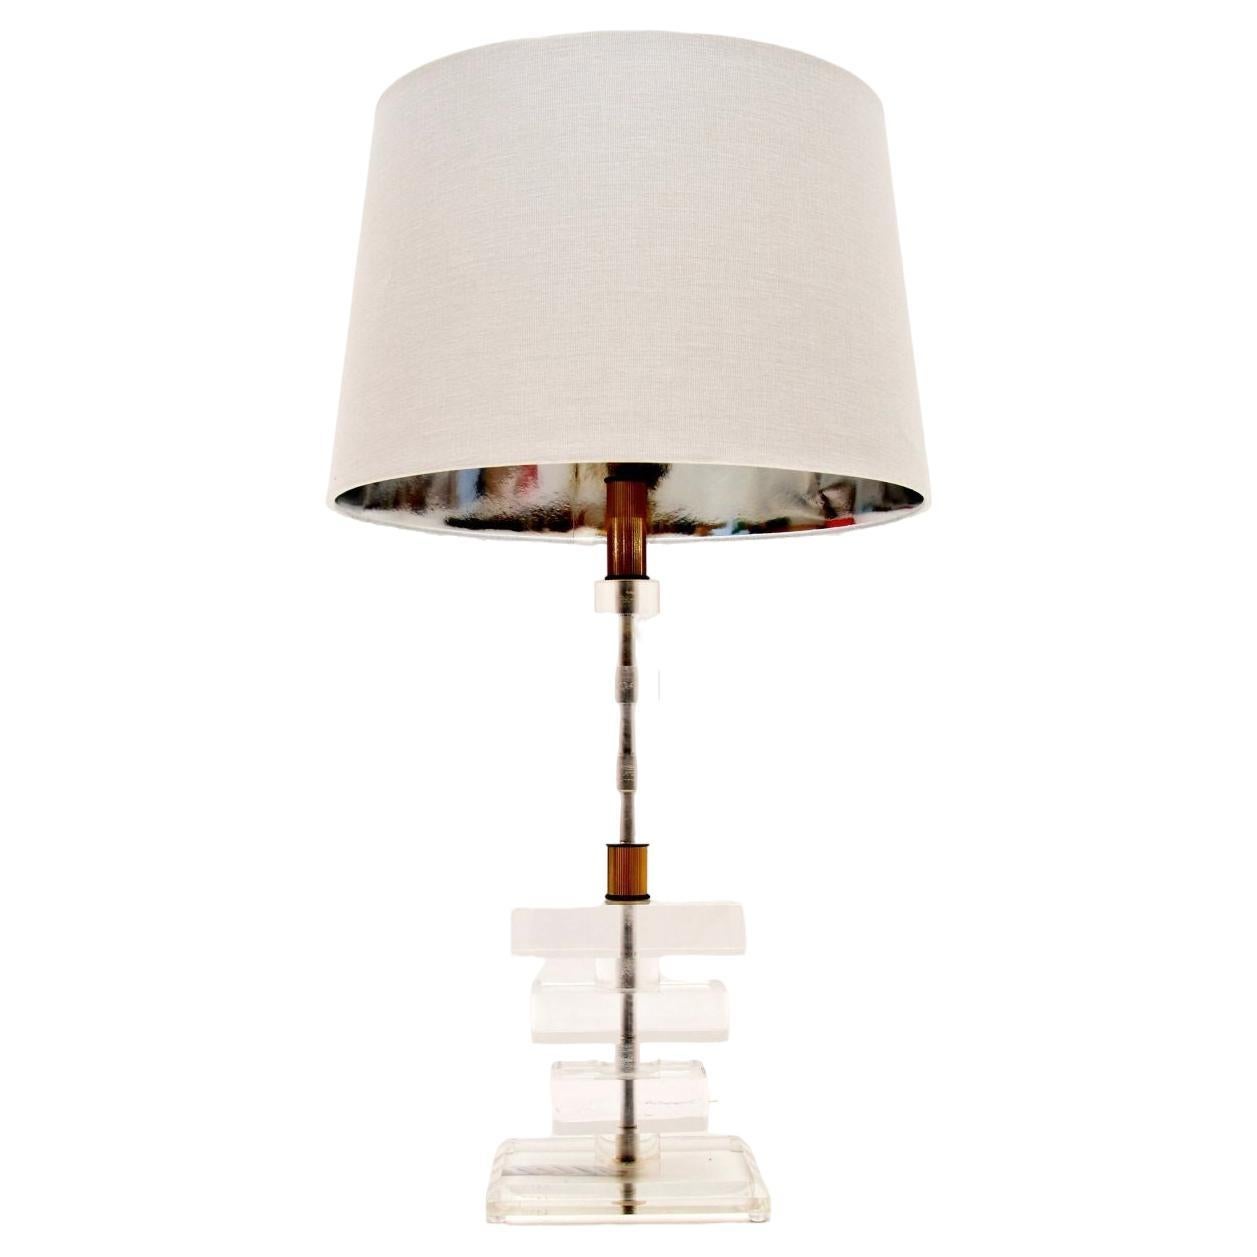 Vintage Acrylic and Brass Table Lamp